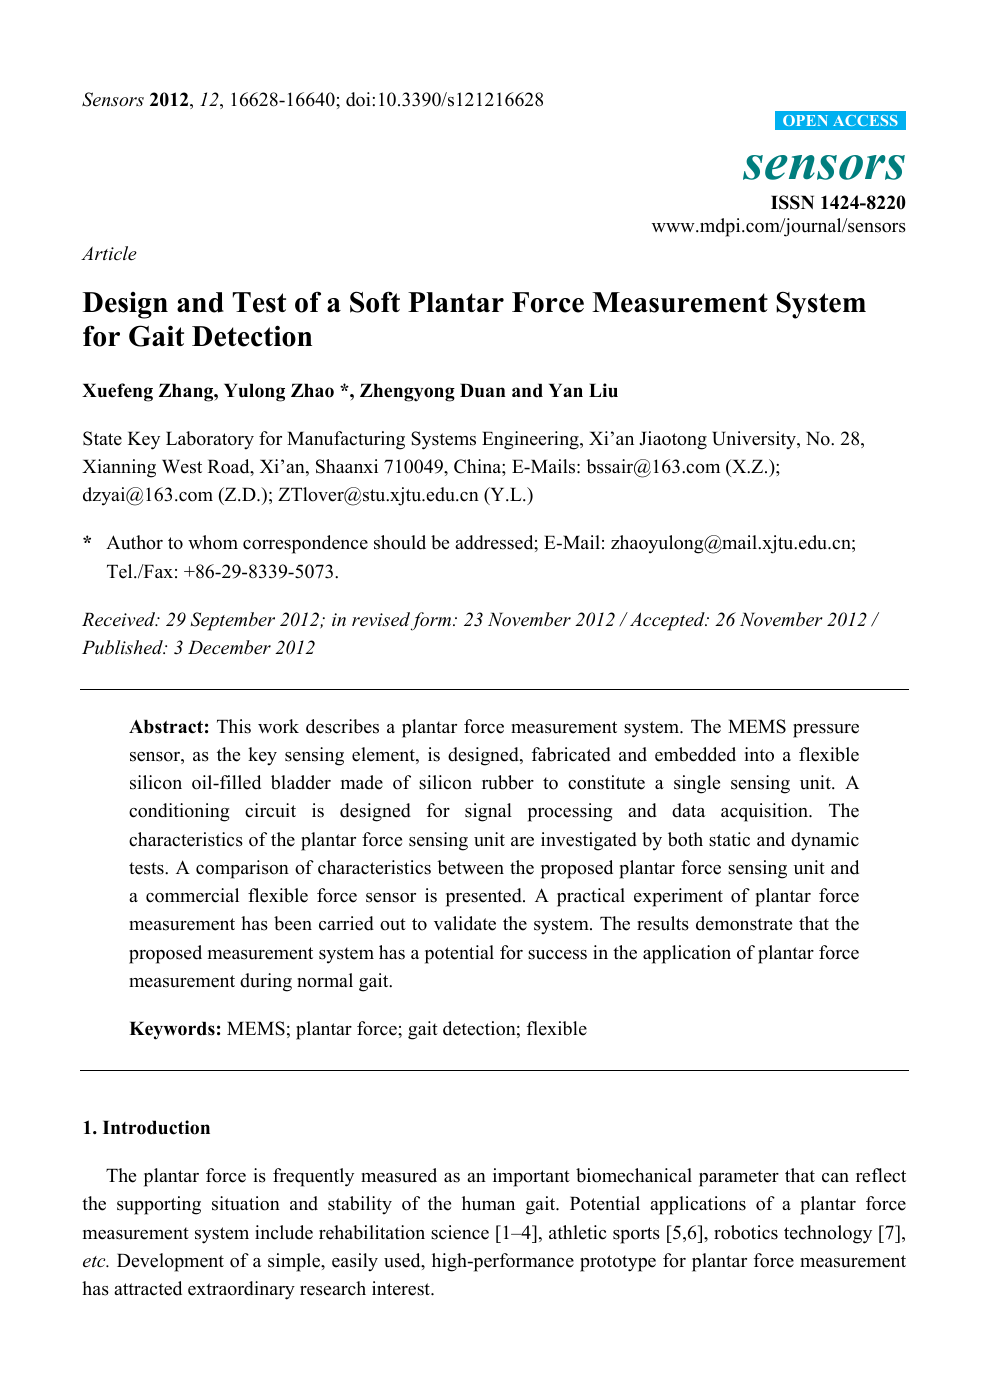 Design And Test Of A Soft Plantar Force Measurement System For Gait Detection Topic Of Research Paper In Medical Engineering Download Scholarly Article Pdf And Read For Free On Cyberleninka Open